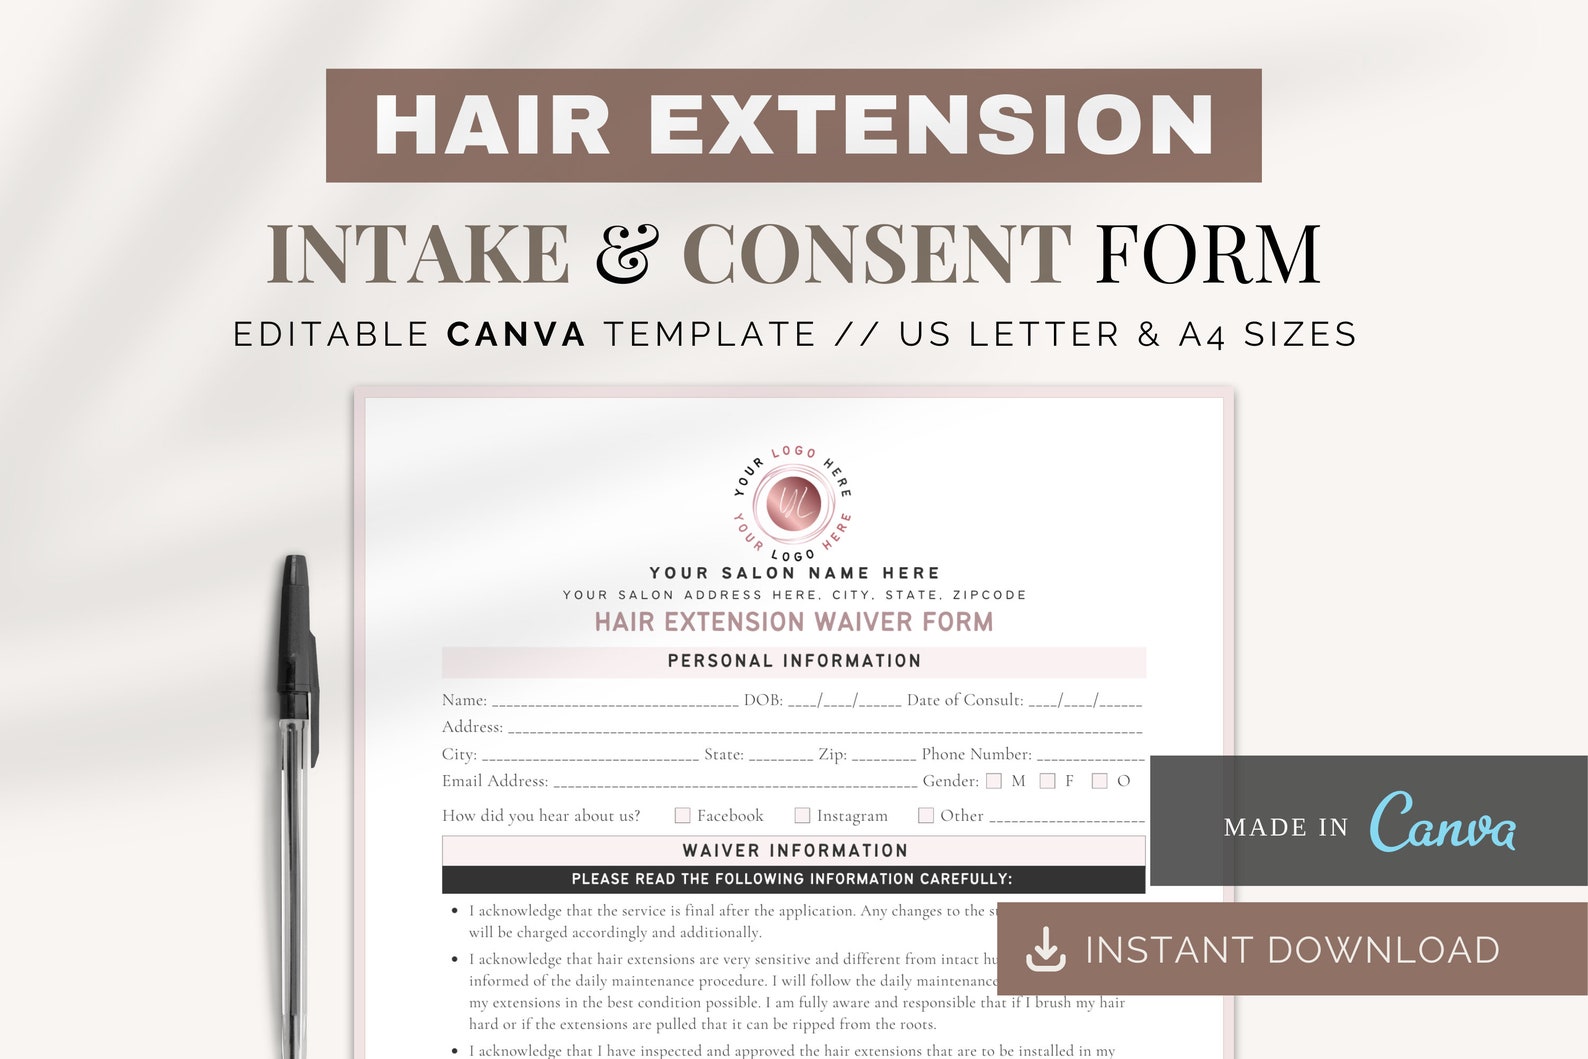 hair-extension-waiver-form-canva-templates-salon-business-etsy